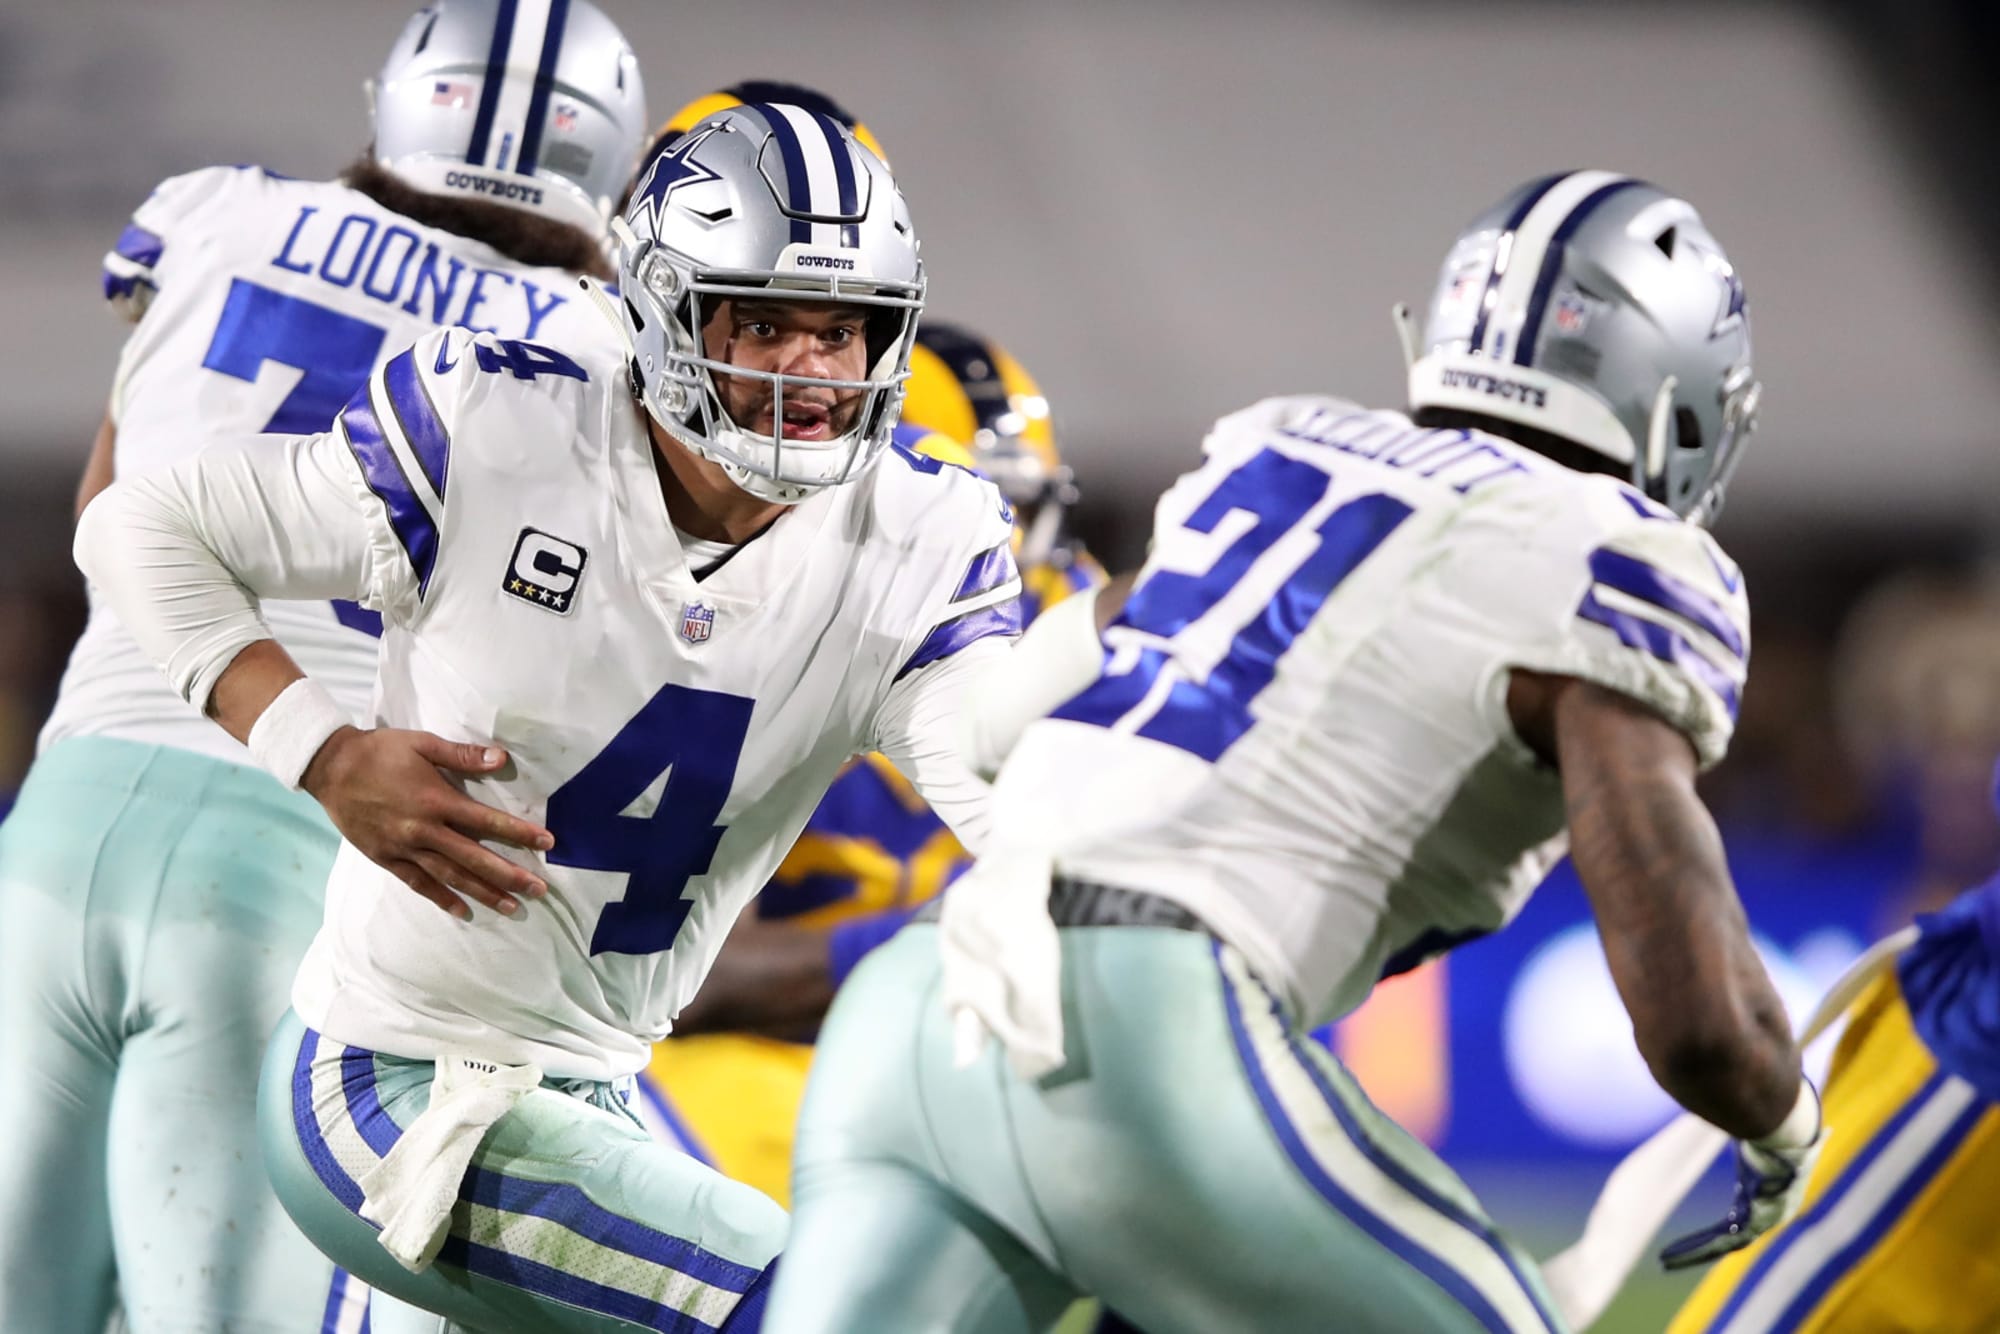 Dallas Cowboys final roster cuts may shock fans in 2019